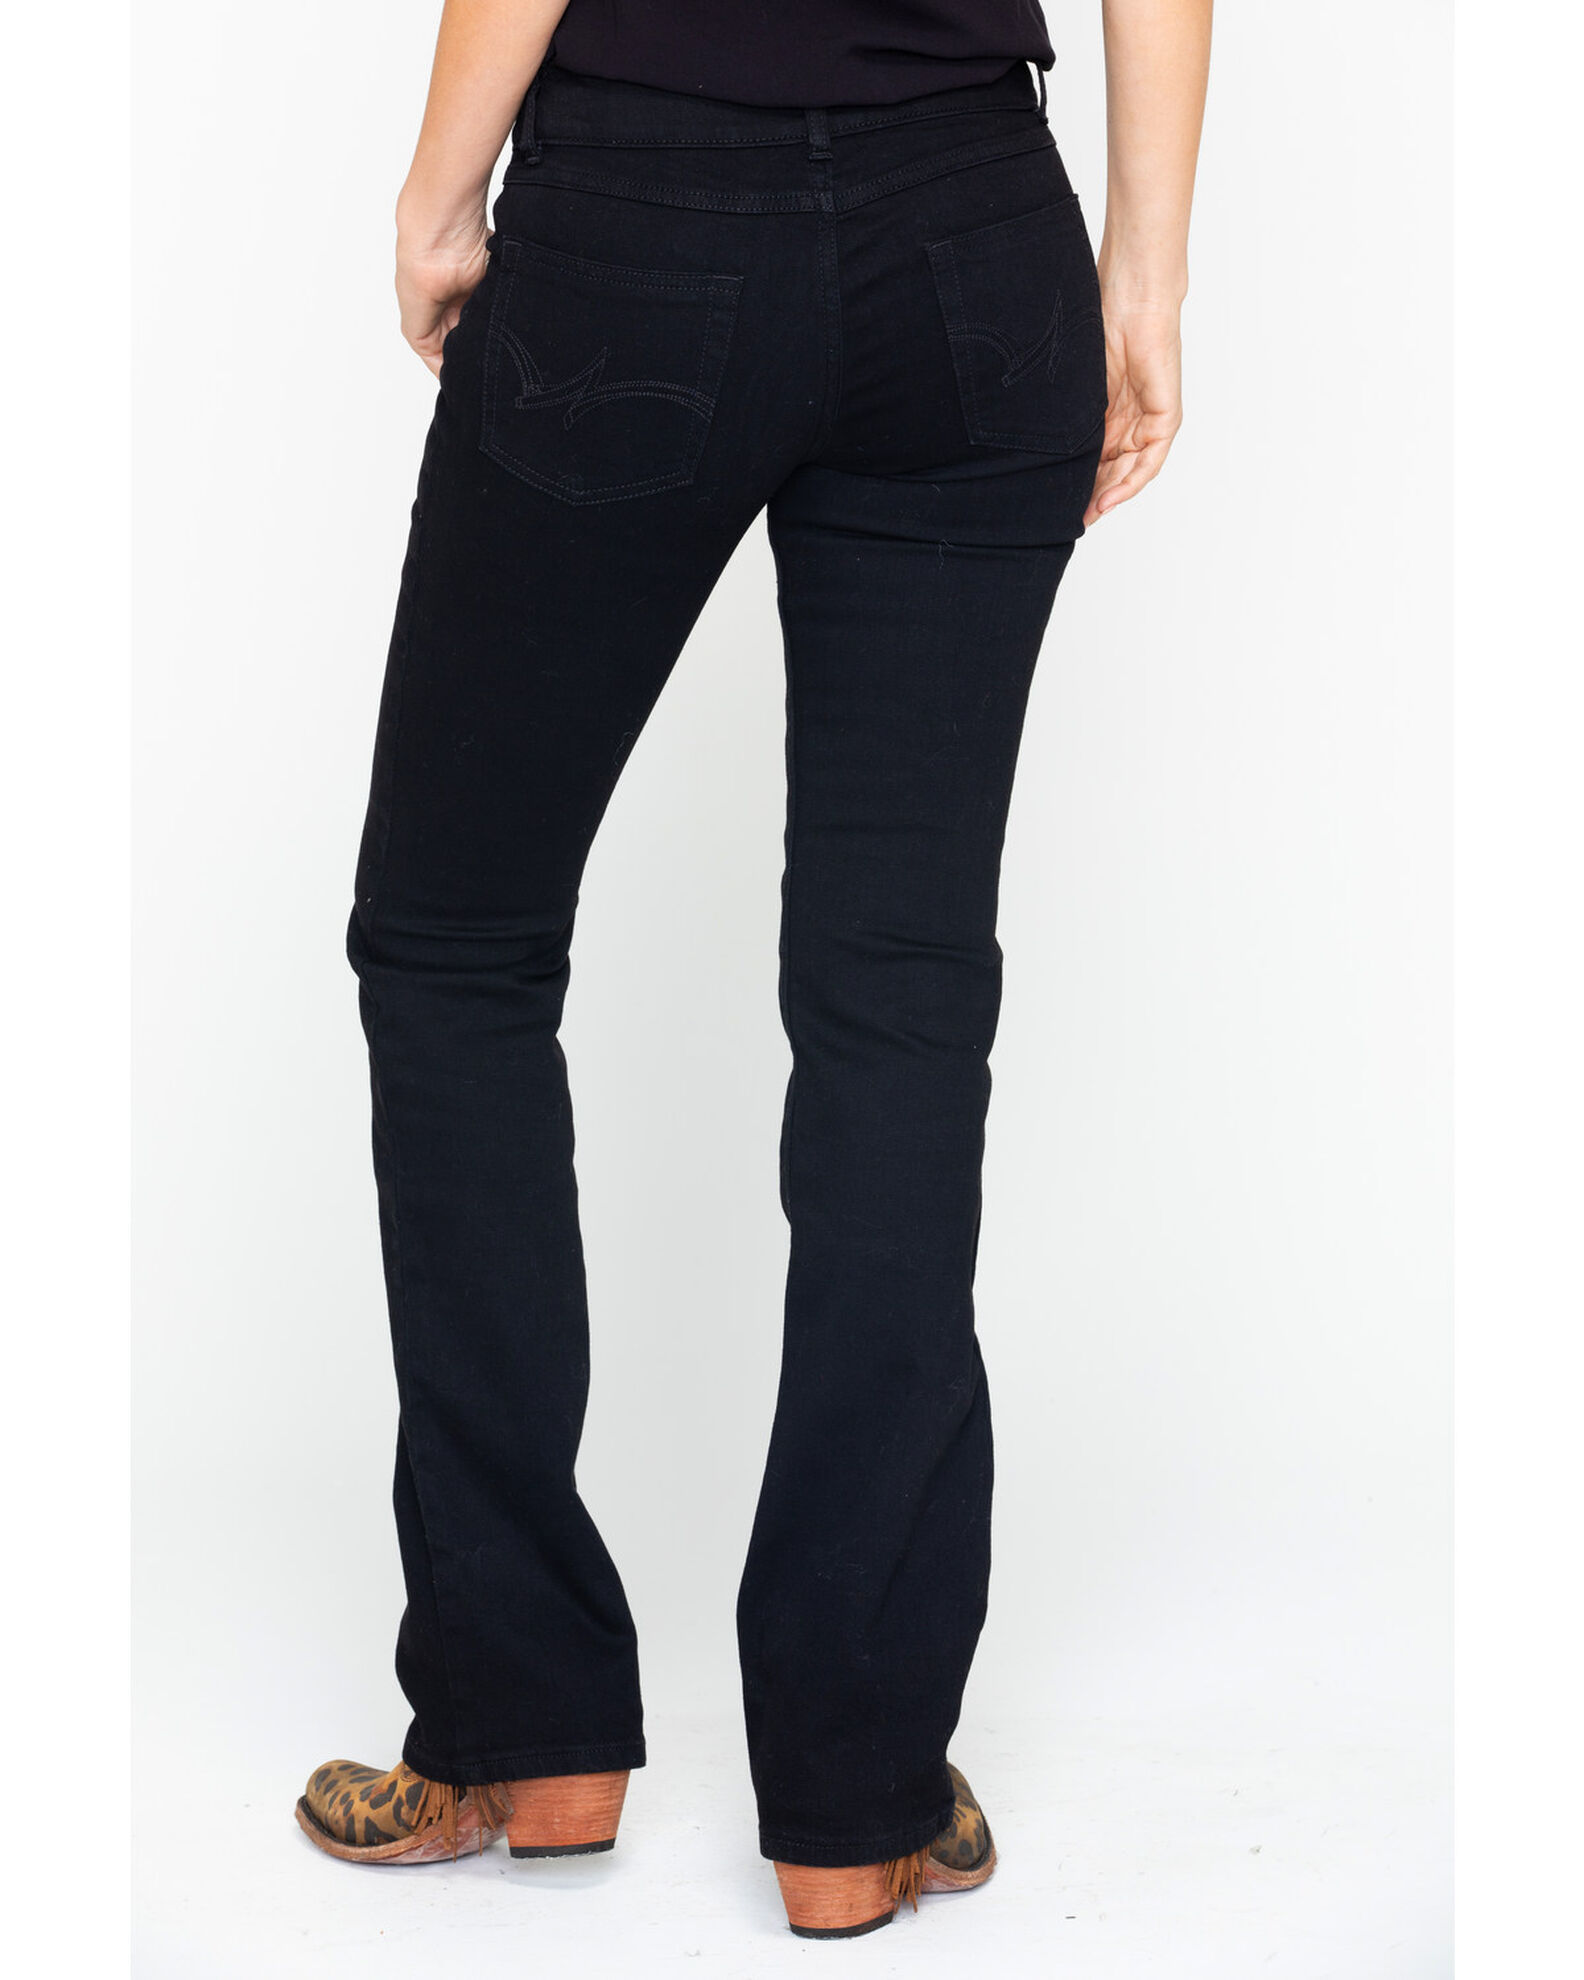 meaning Moral education image Wrangler Women's Black Mid-Rise Bootcut Jeans | Boot Barn